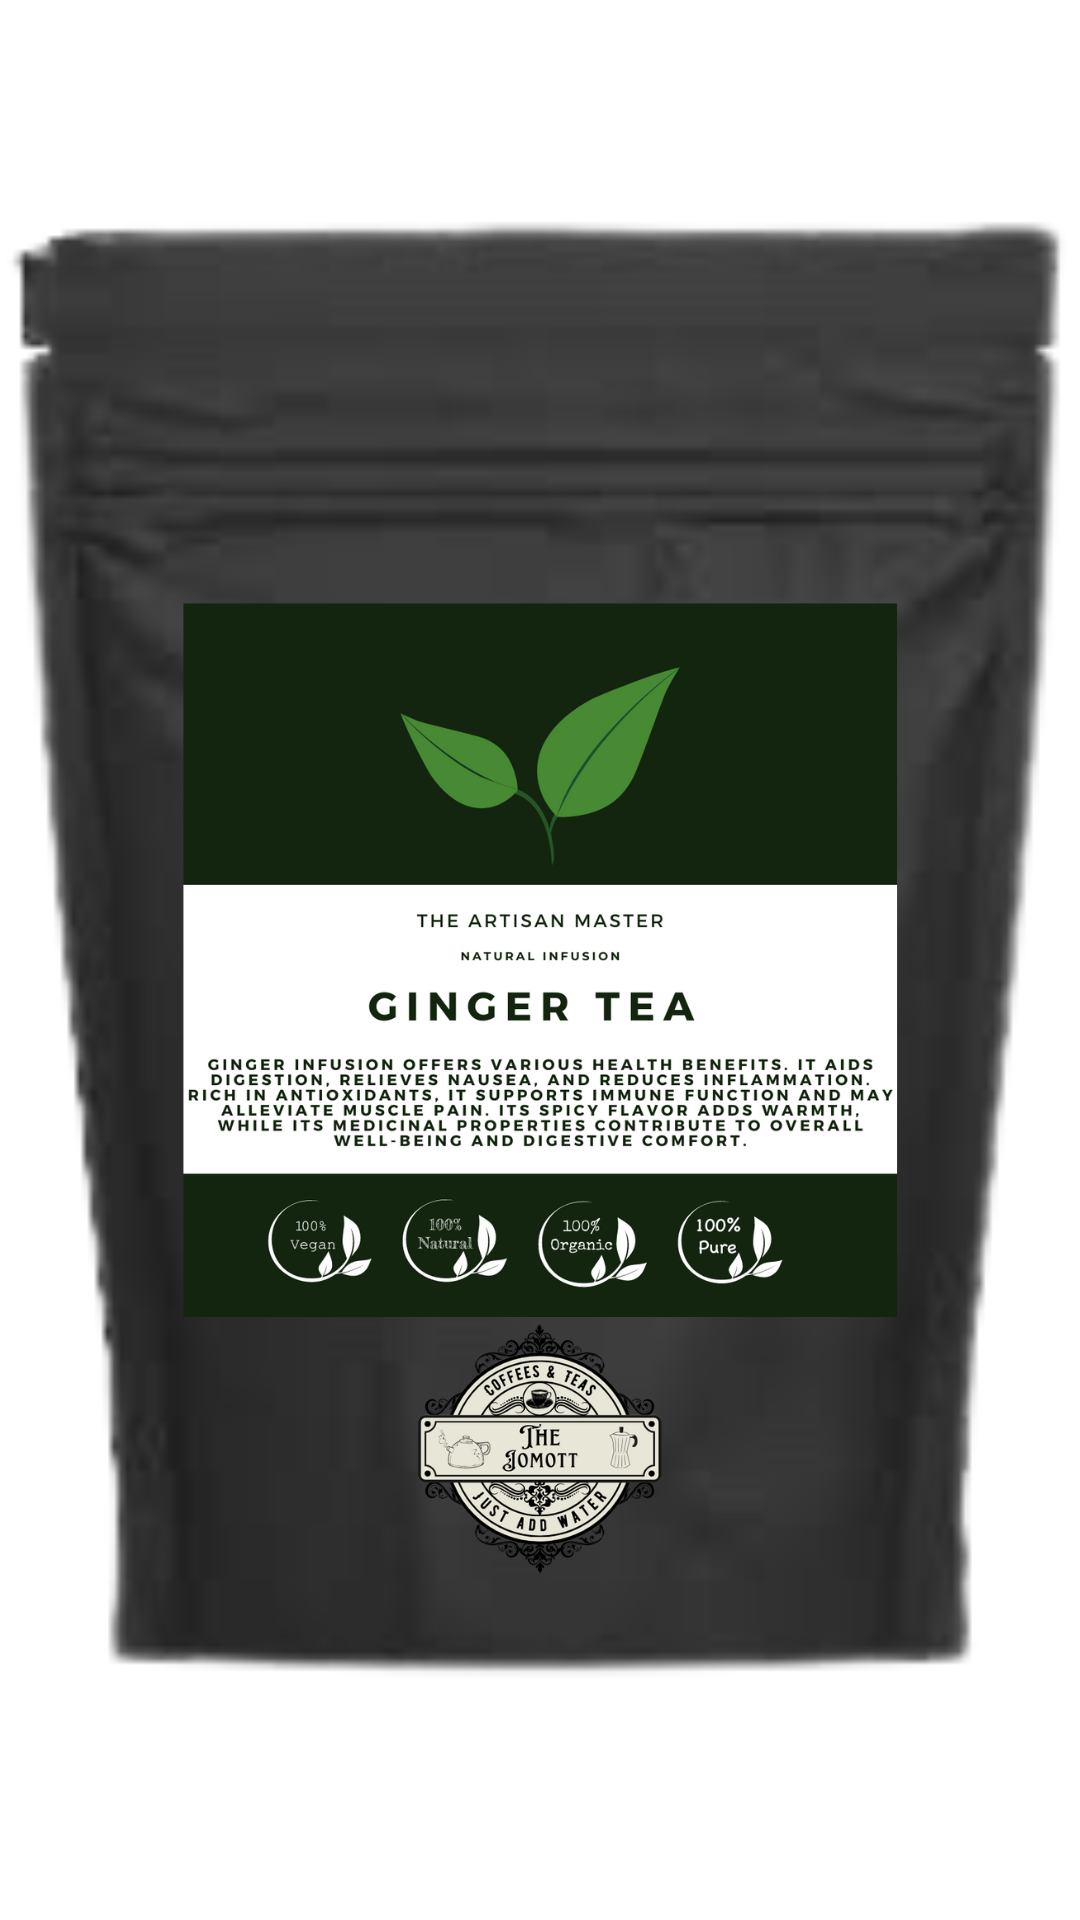 GINGER INFUSION